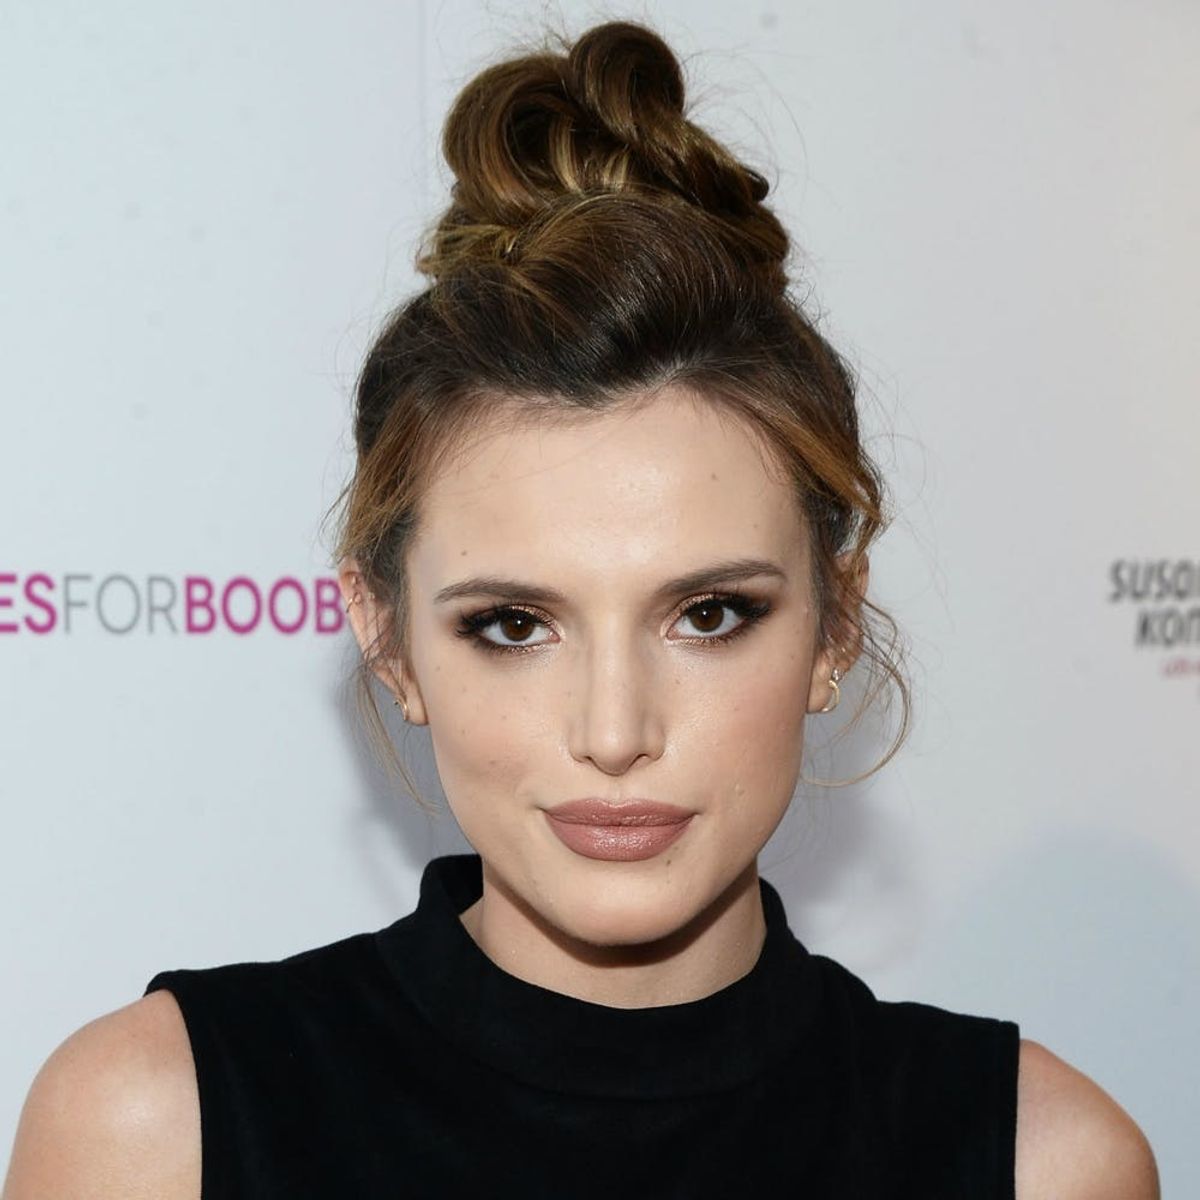 Bella Thorne Just Debuted This Totally Badass New Hair Color